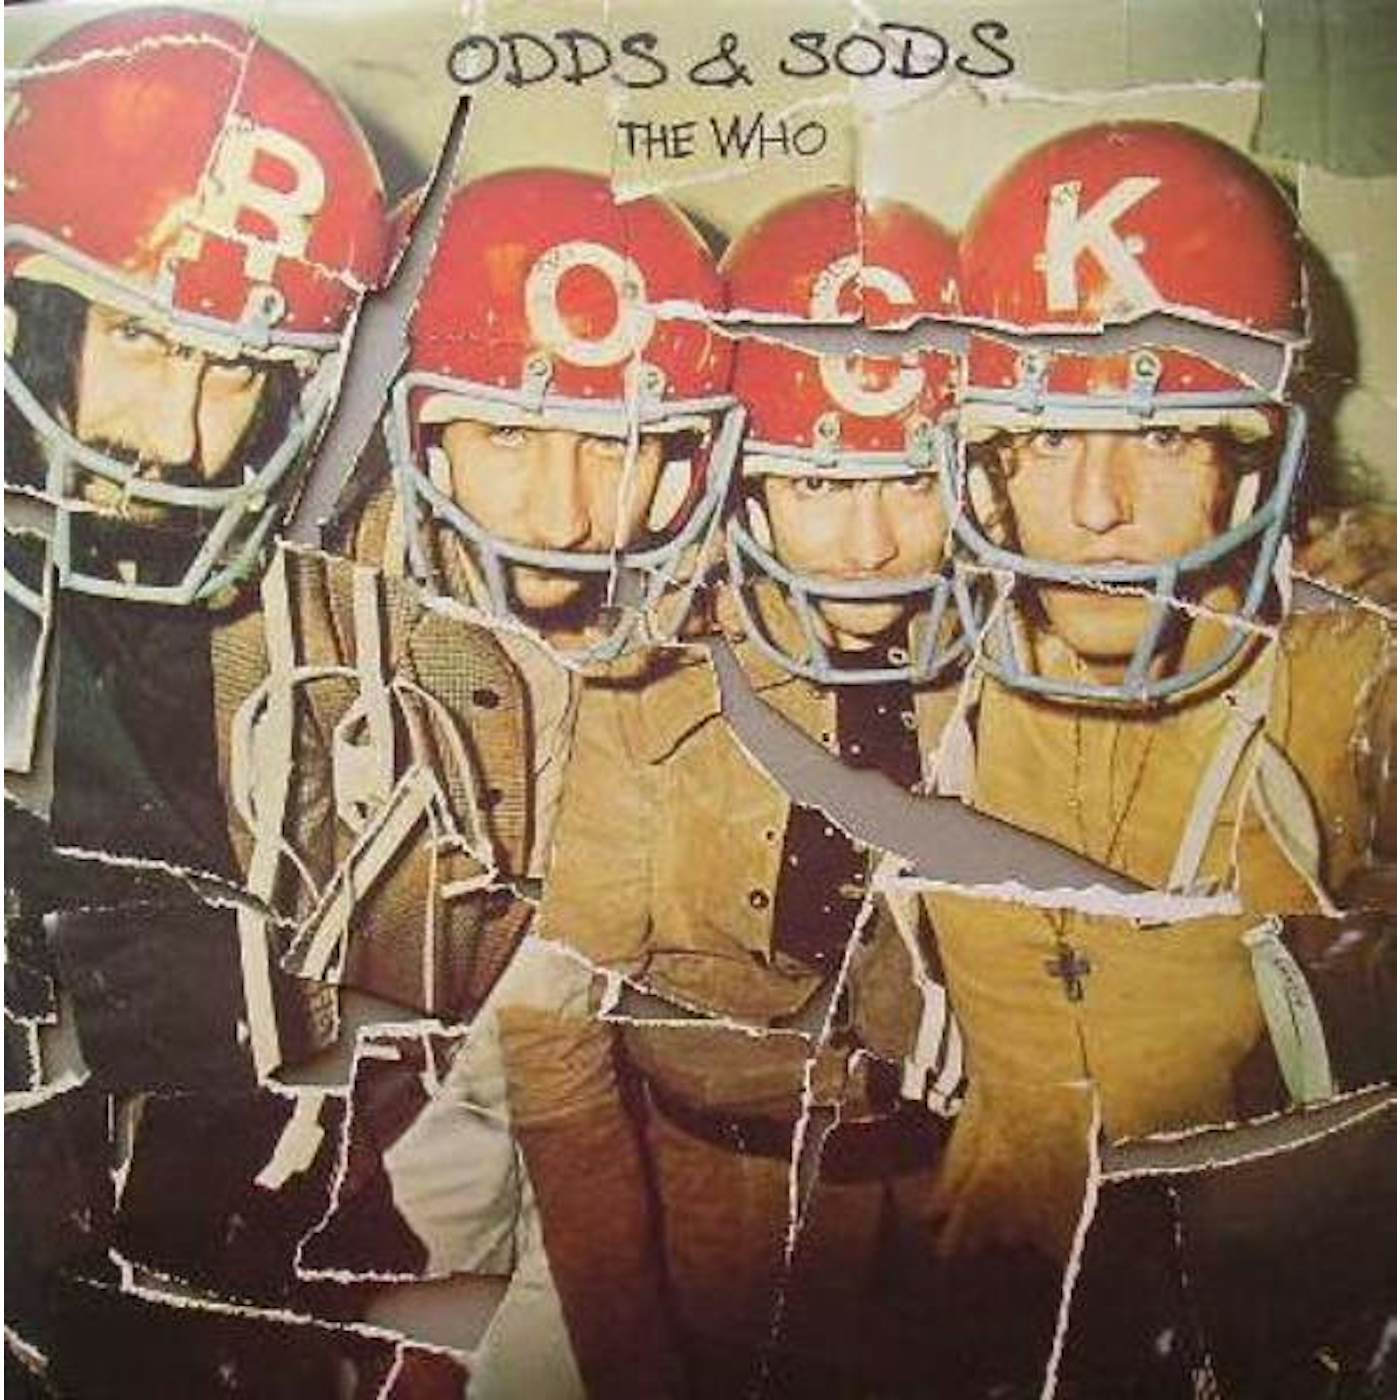 The Who Odds & Sods Vinyl Record